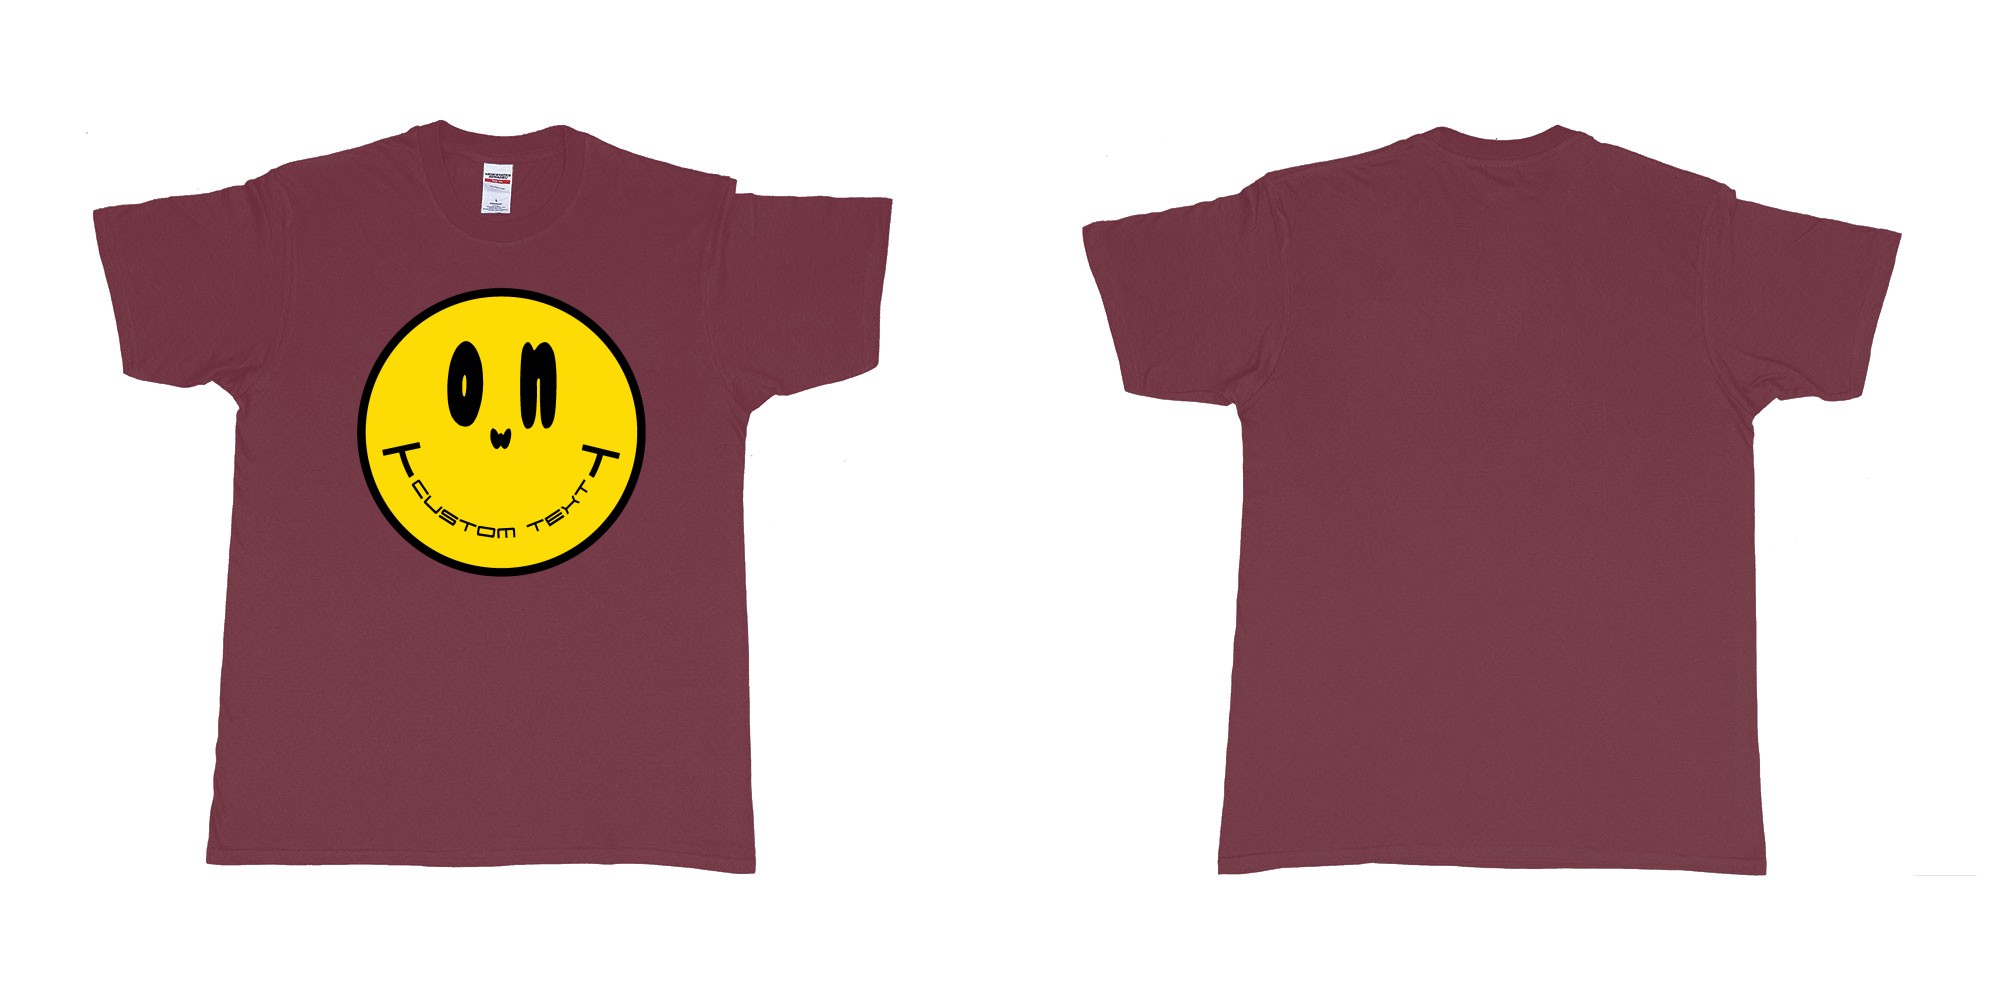 Custom tshirt design smiley face emoji custom text in fabric color marron choice your own text made in Bali by The Pirate Way